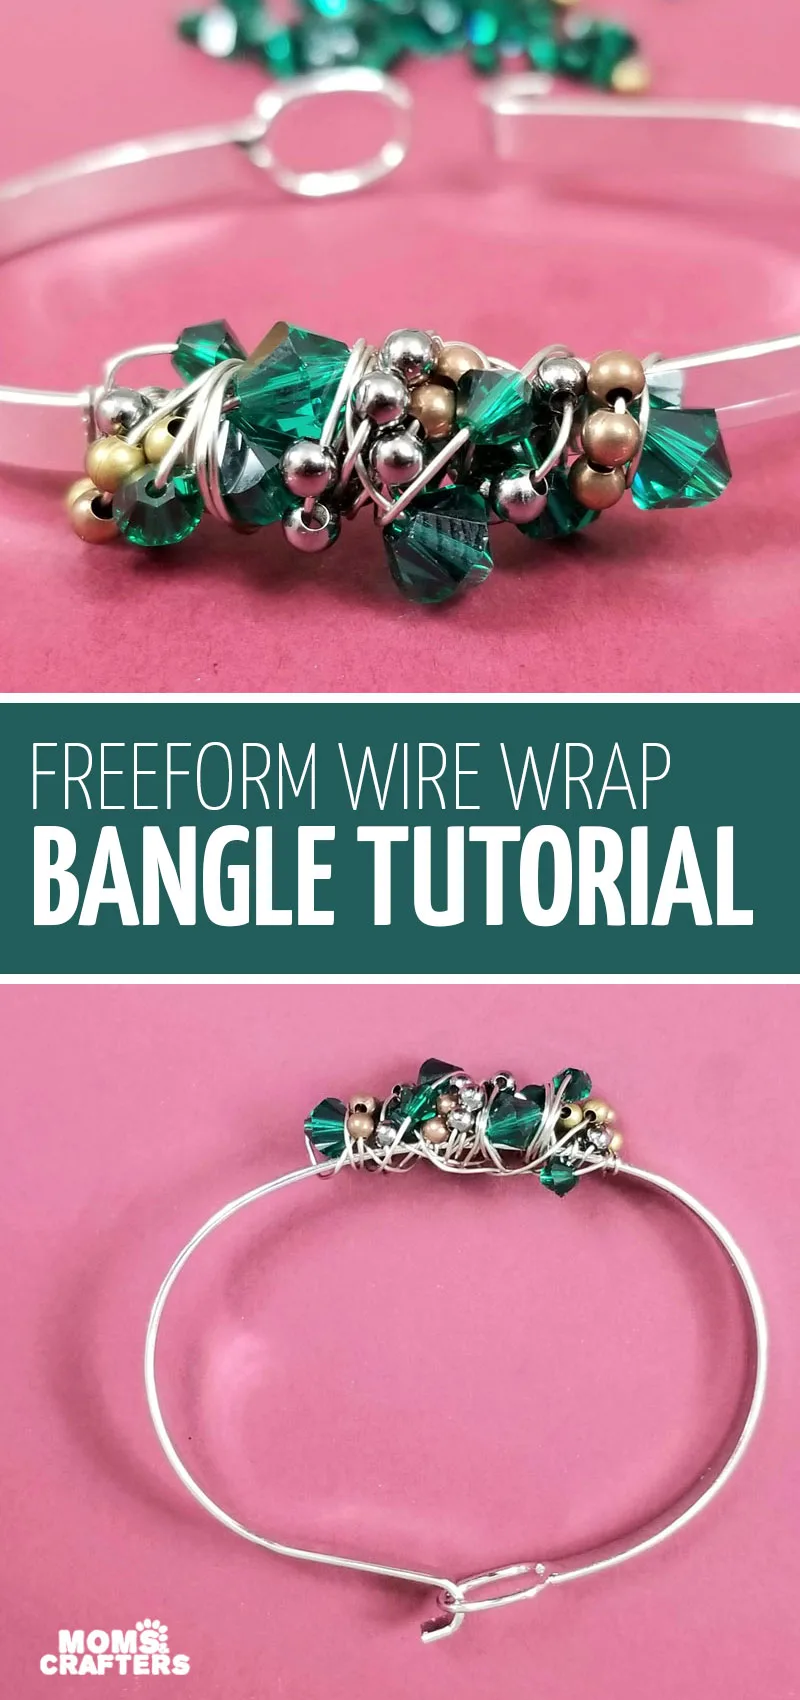 Click for this super duper easy wire wrapped bangle bracelet tutorial - a fun DIY wire wrapping project and jewery making idea for beginners through advanced!